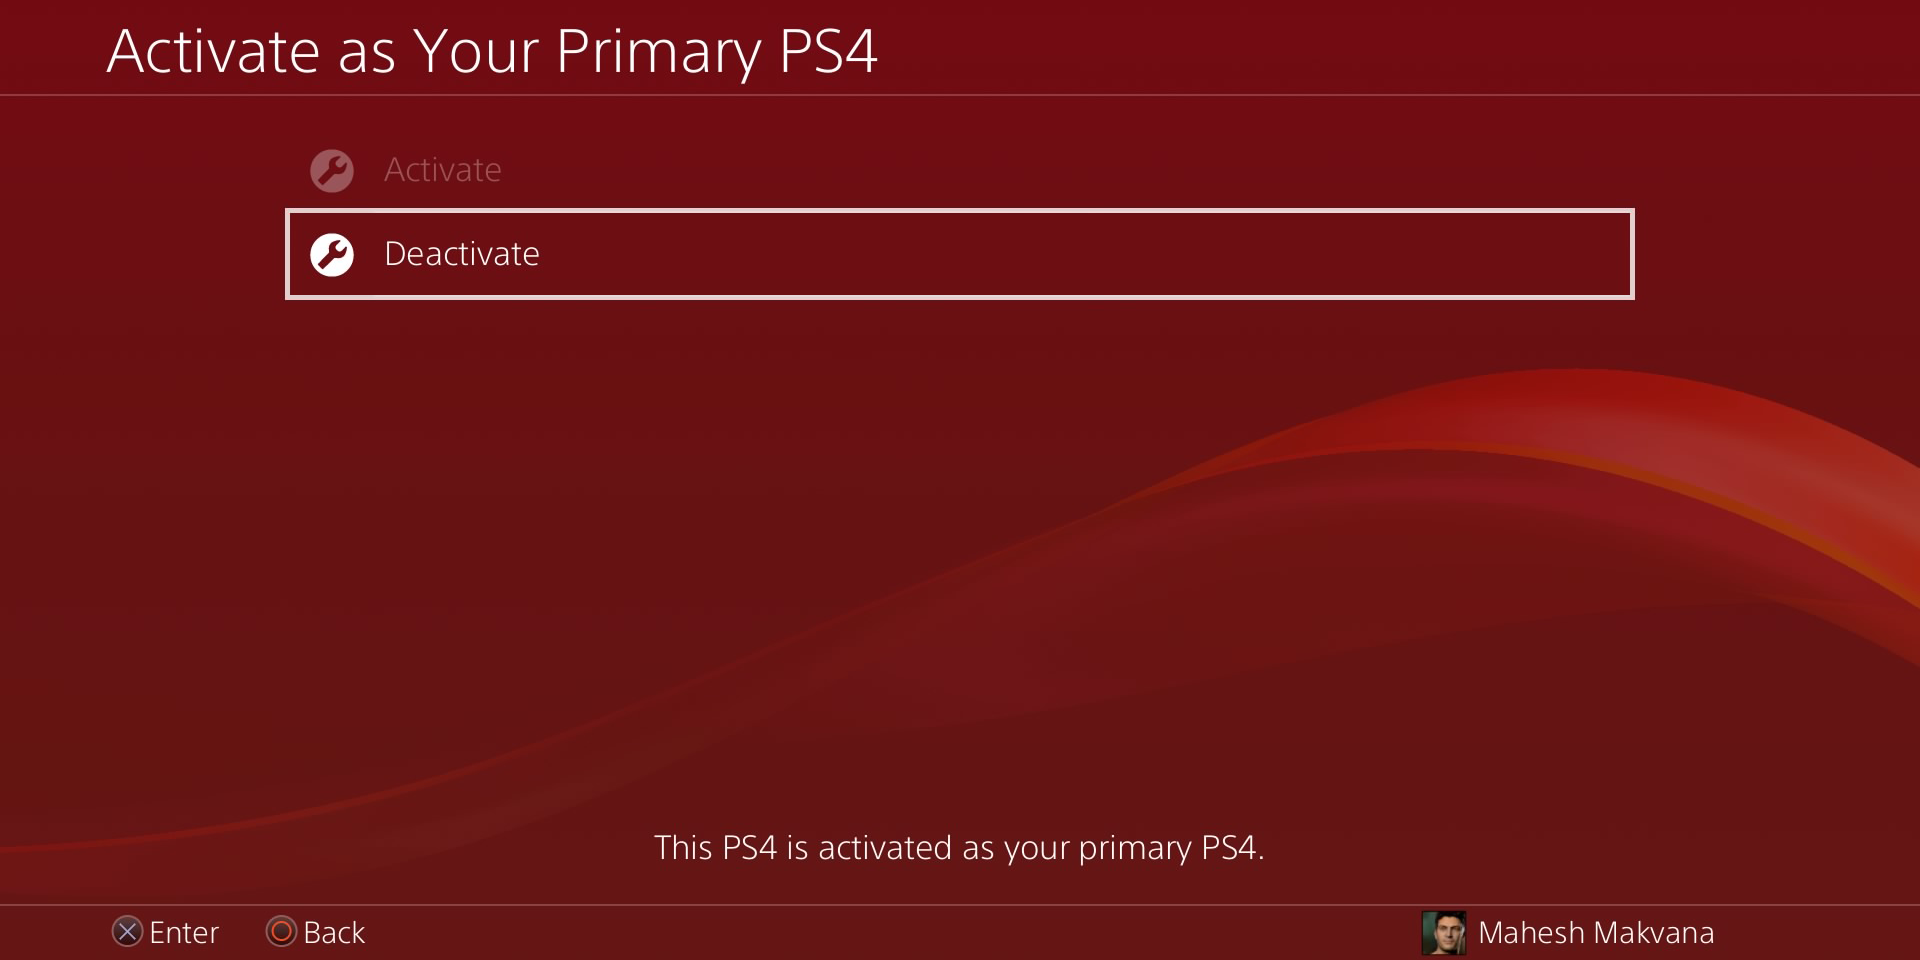 The Activate Primary console page on the PlayStation 4